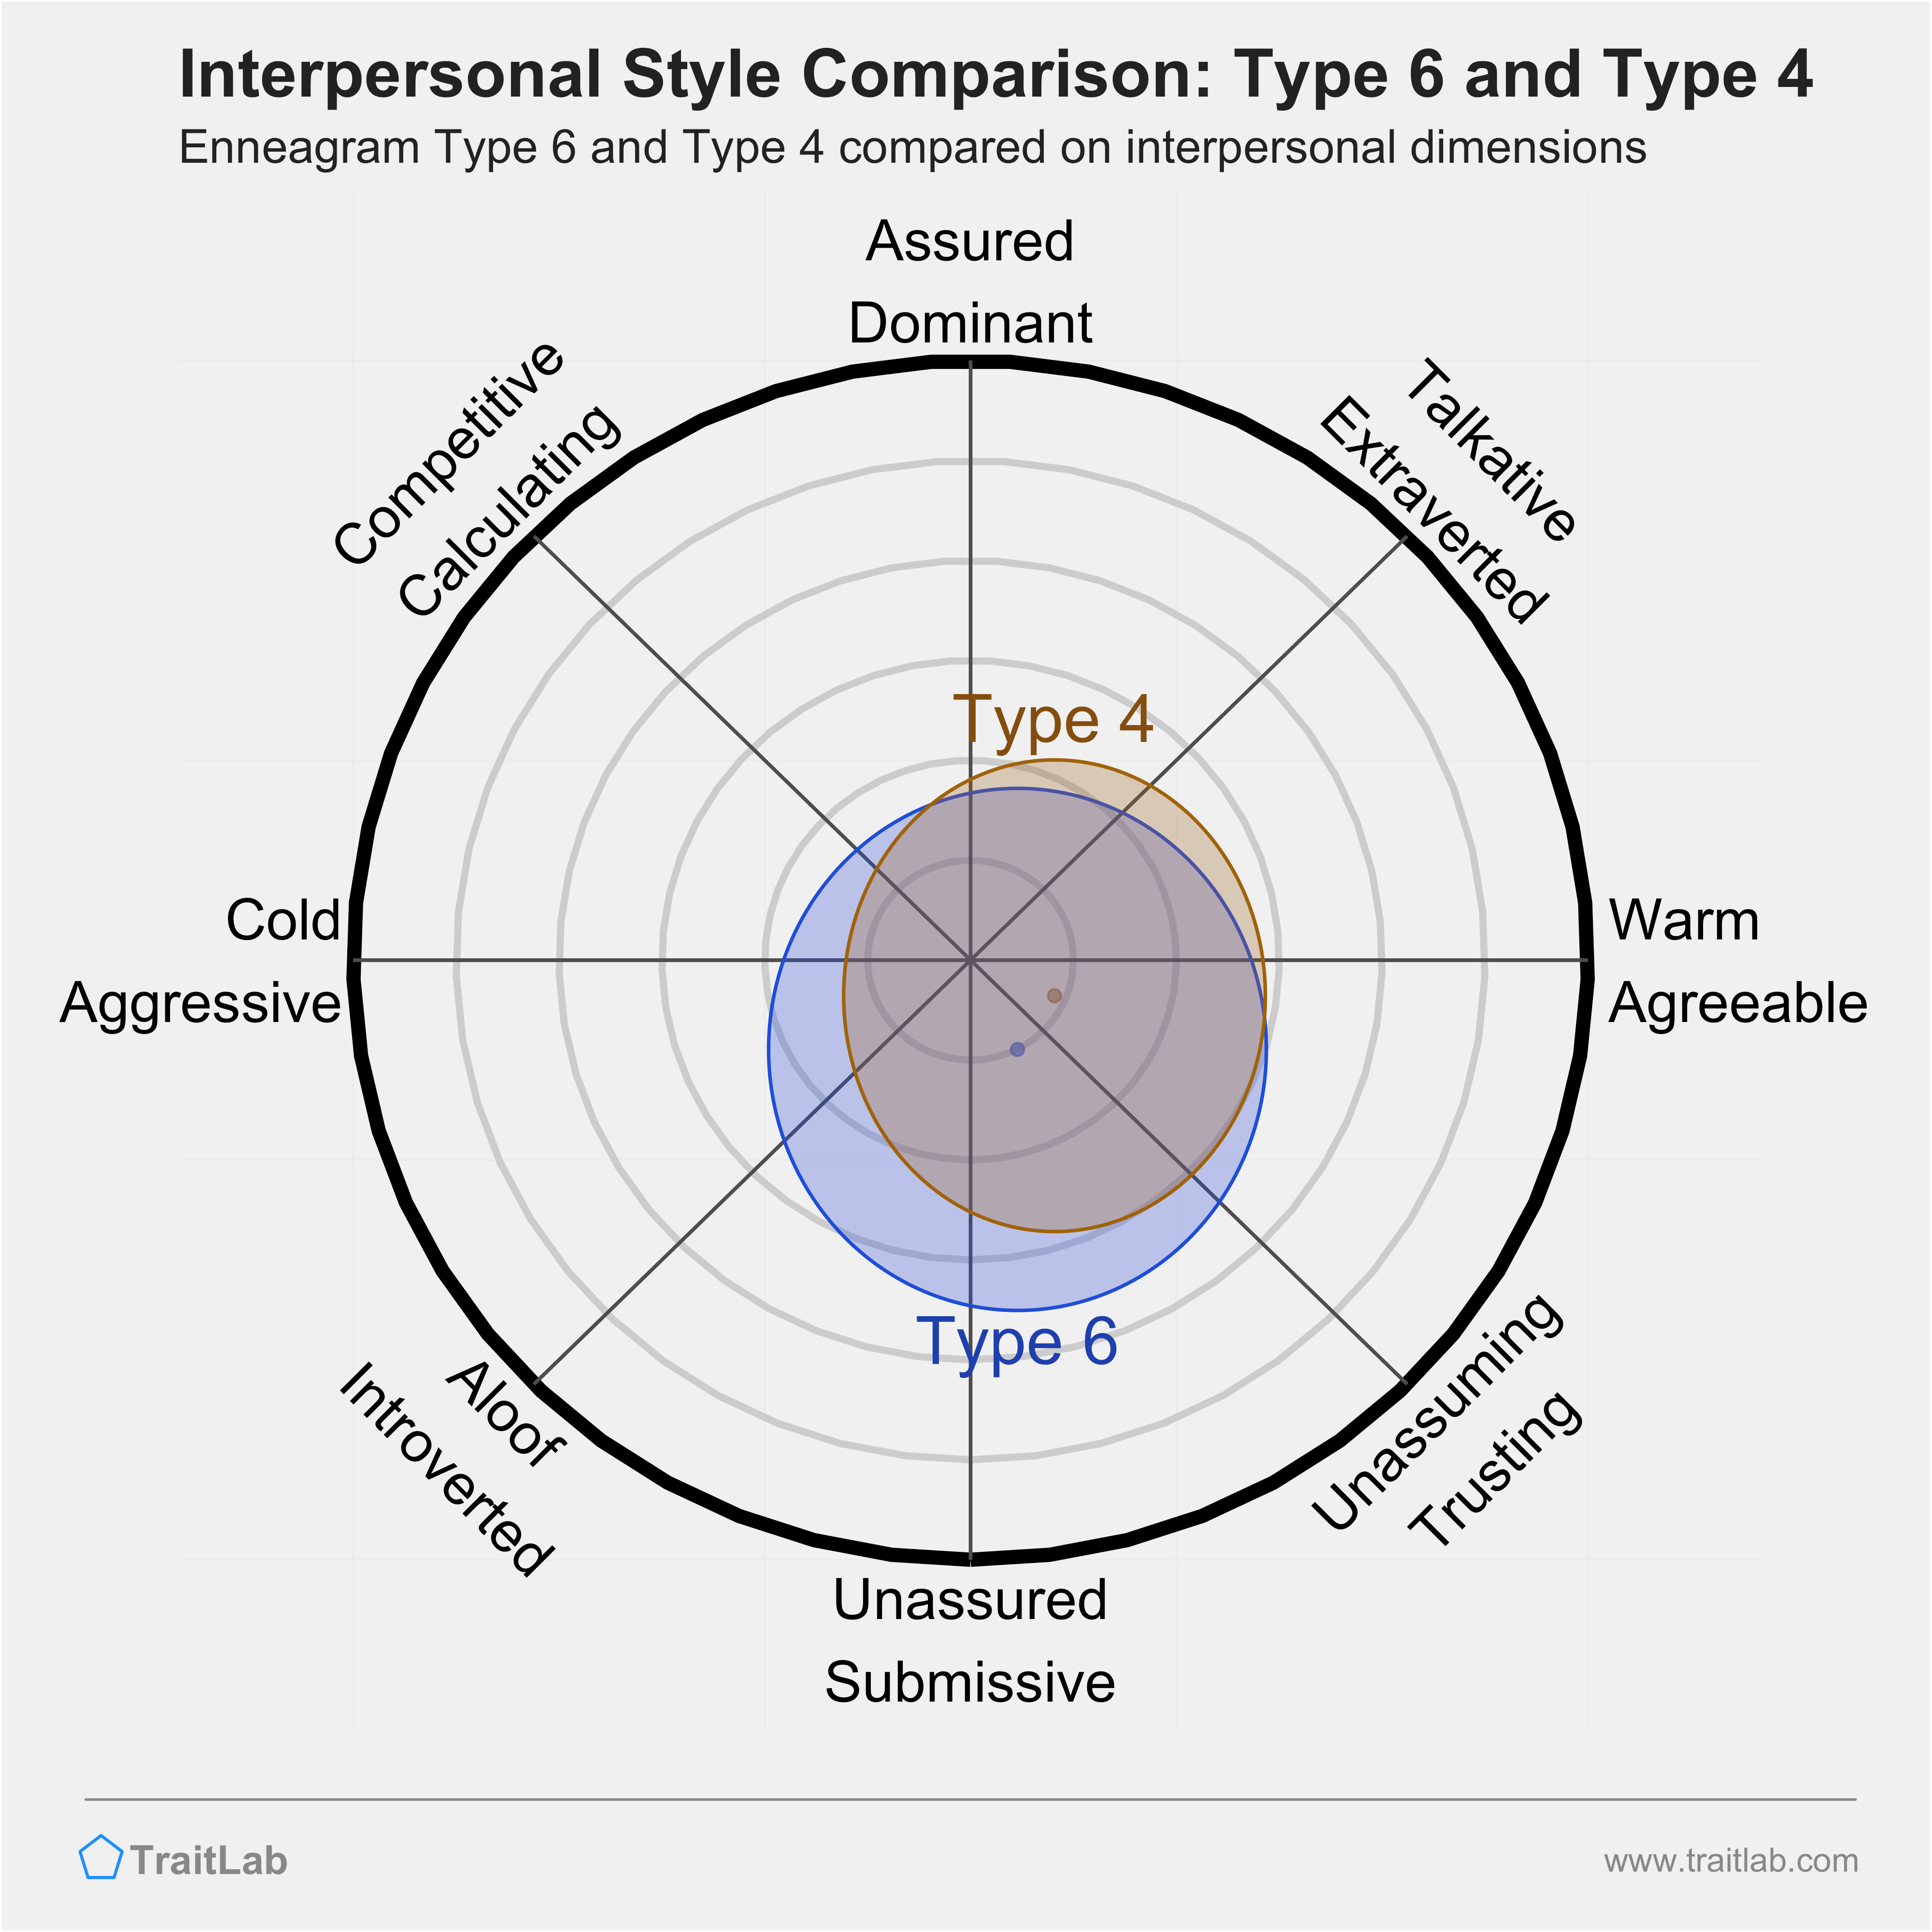 Enneagram Type 6 and Type 4 comparison across interpersonal dimensions